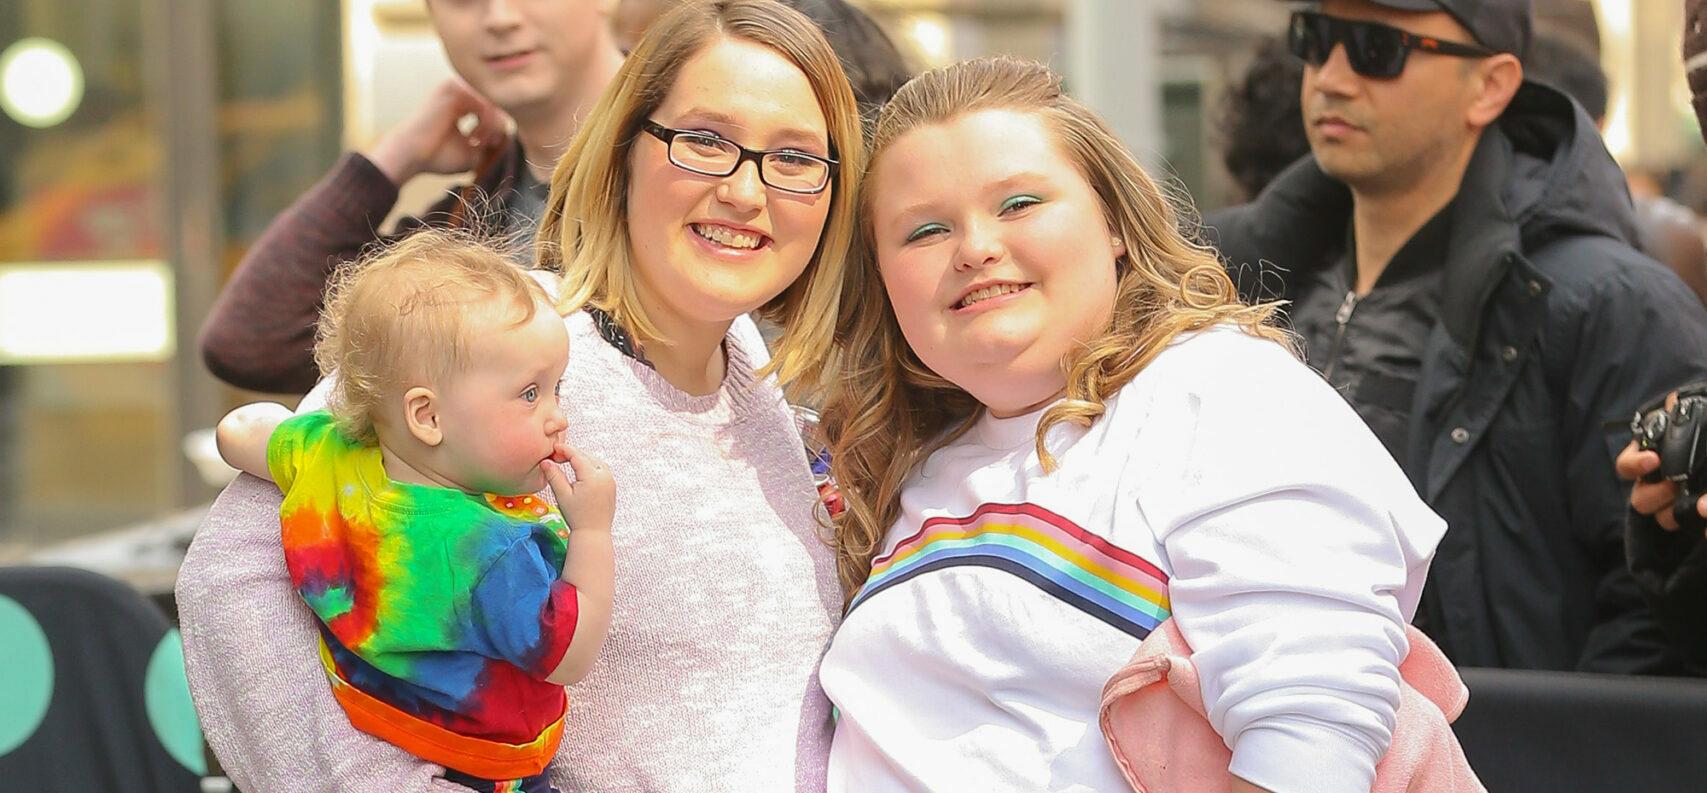 Honey Boo Boo Opens Up On Fat-Shaming, 'I Don't Have Many Friends'